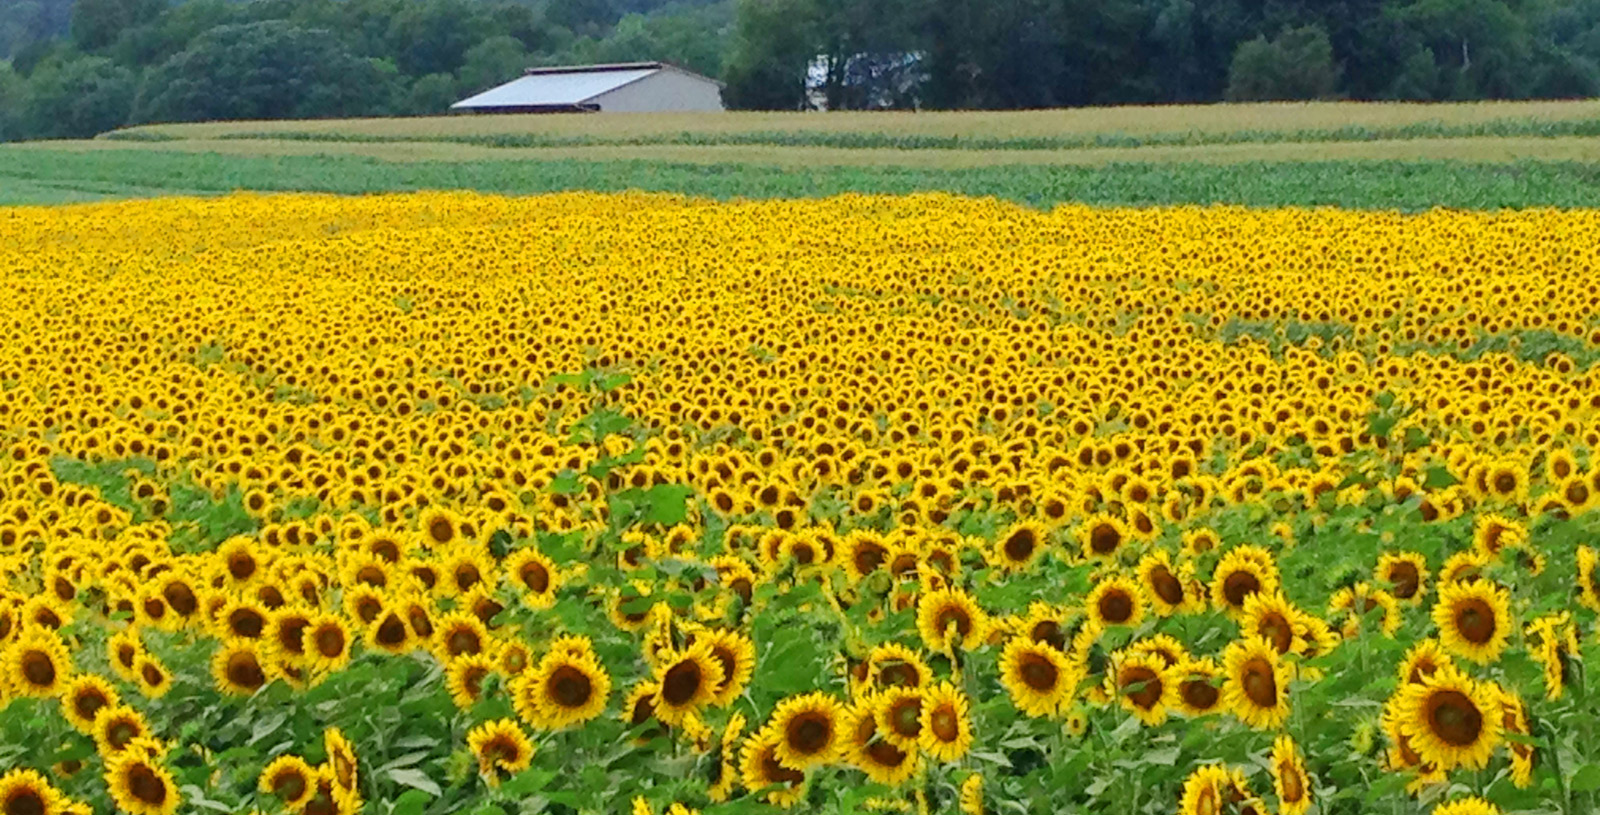 North Branford Landscape filled with Sunflowers